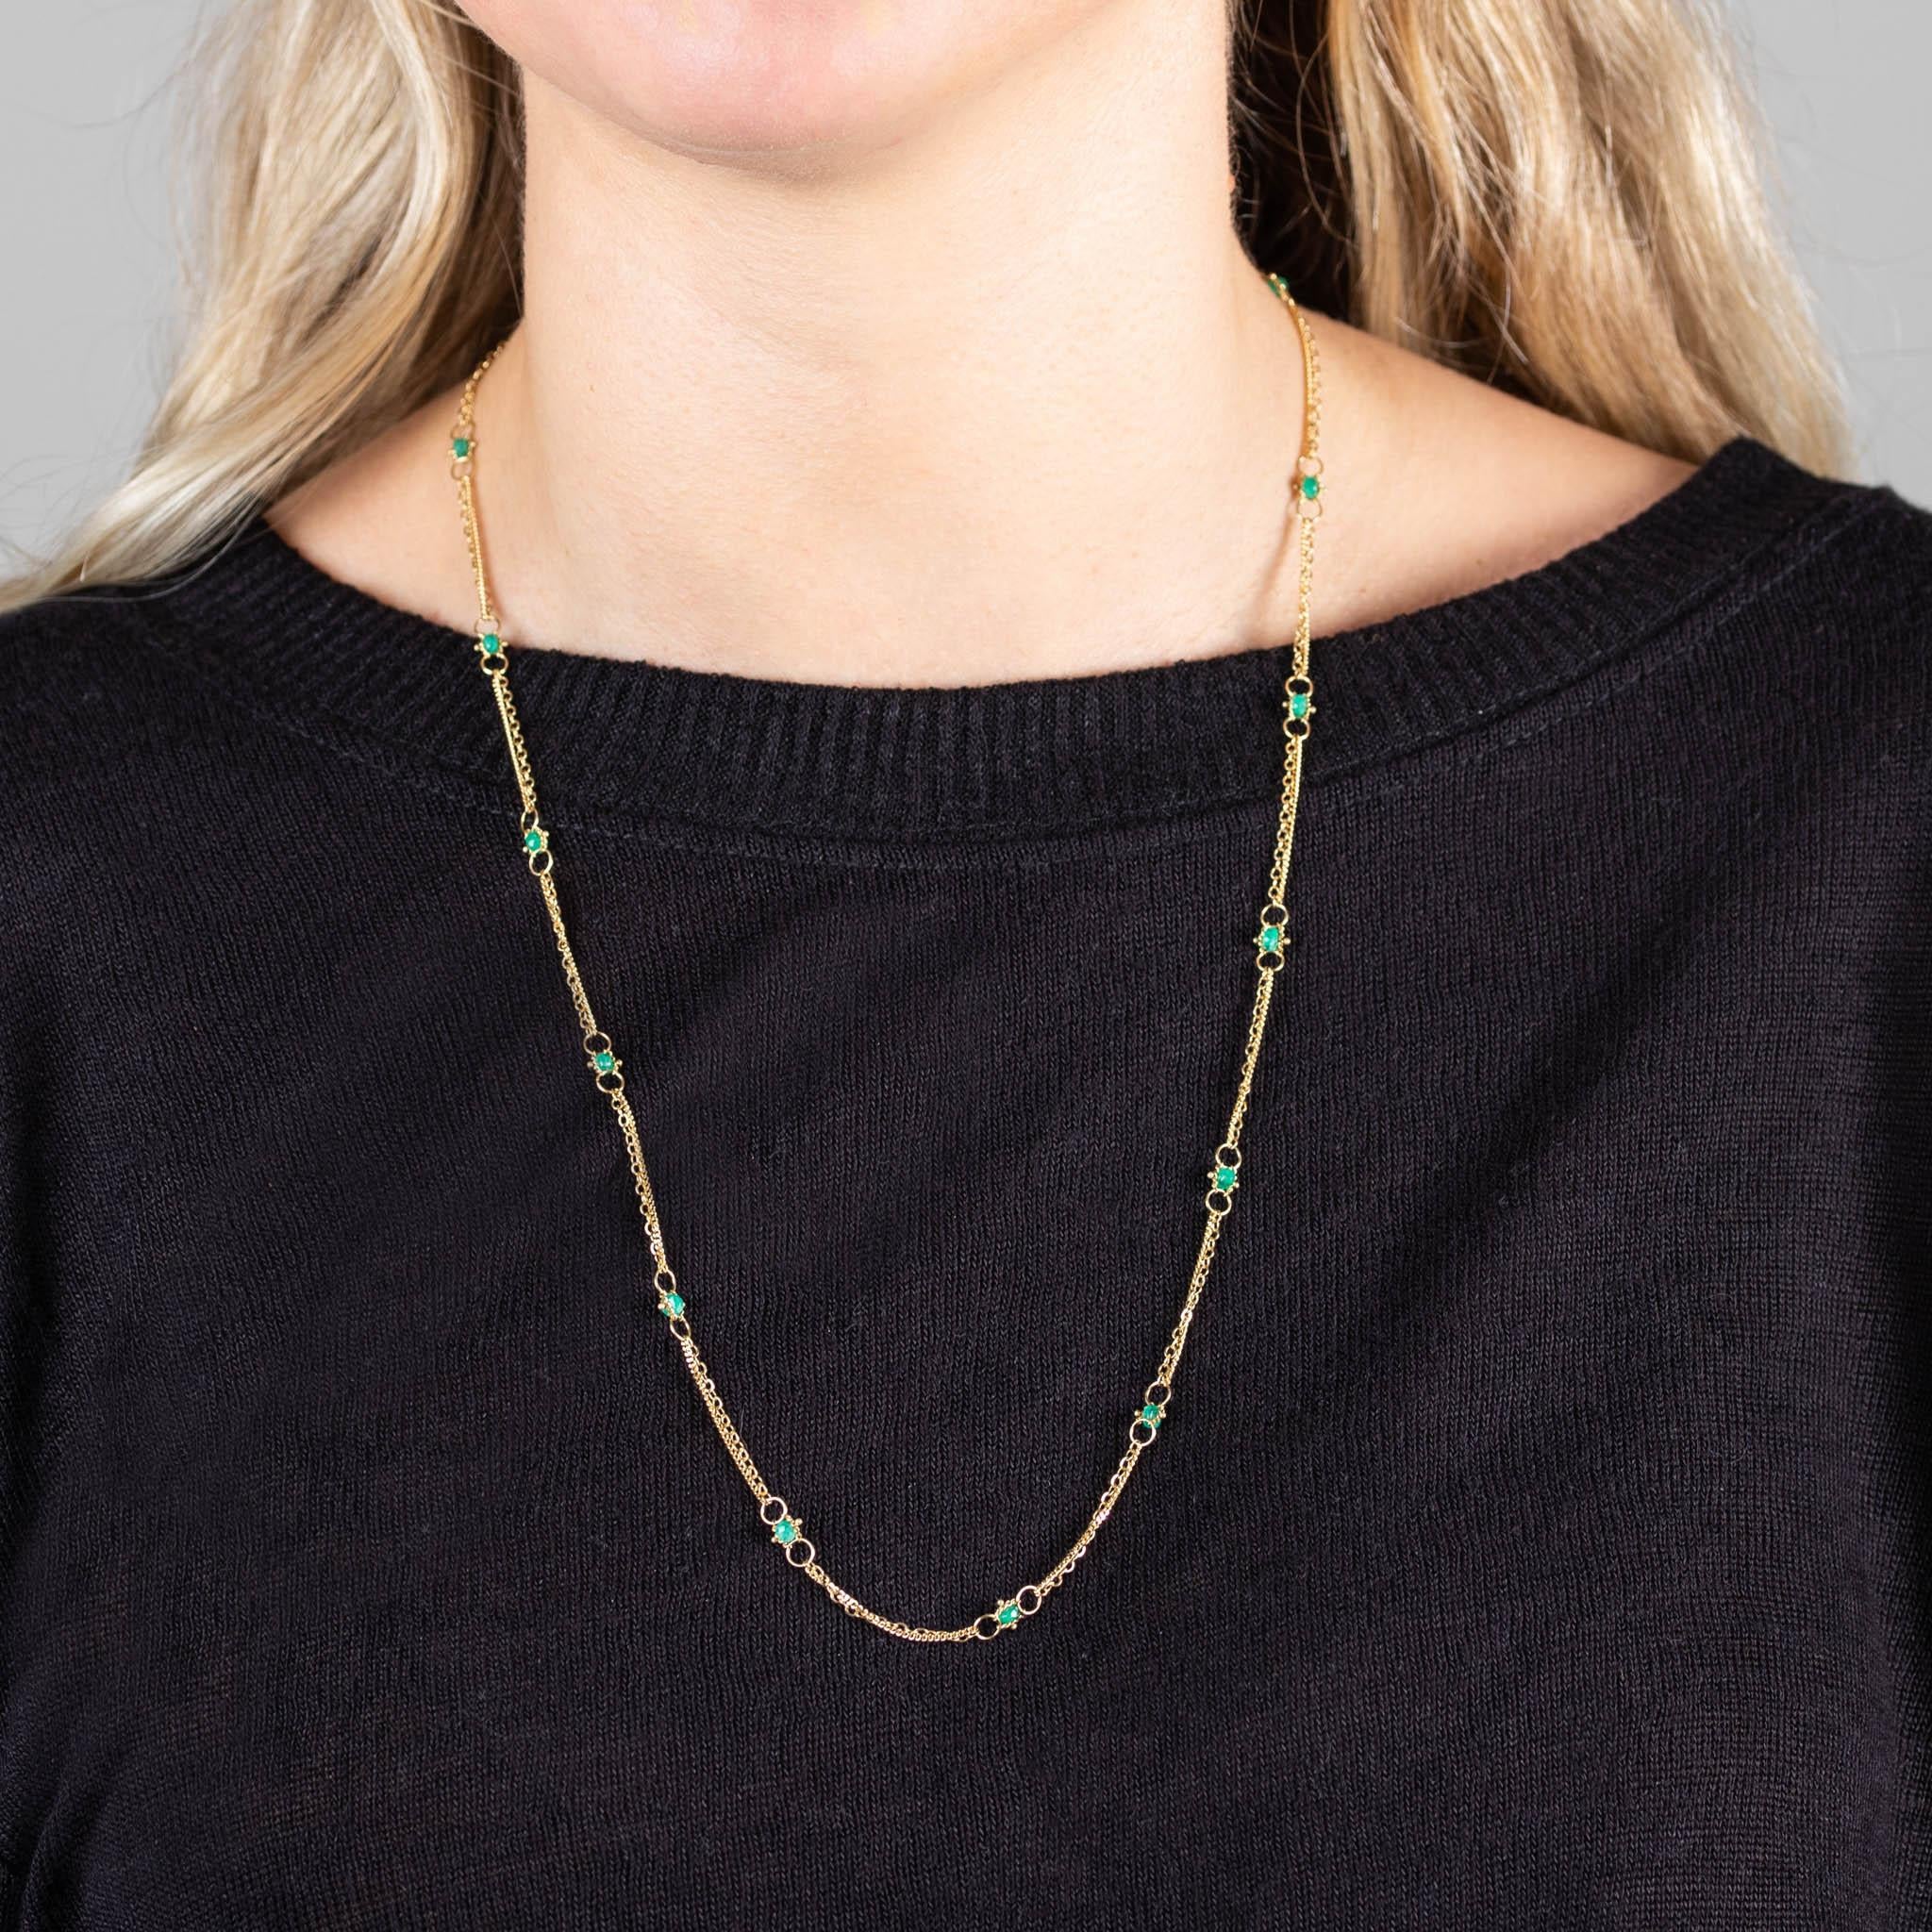 This graceful and refined necklace honors tiny Emerald stones by encircling them with gold. Each stone is hand woven with strands of 18k yellow gold. Emerald is said to bring prosperity and abundance to the wearer - perhaps this necklace will be